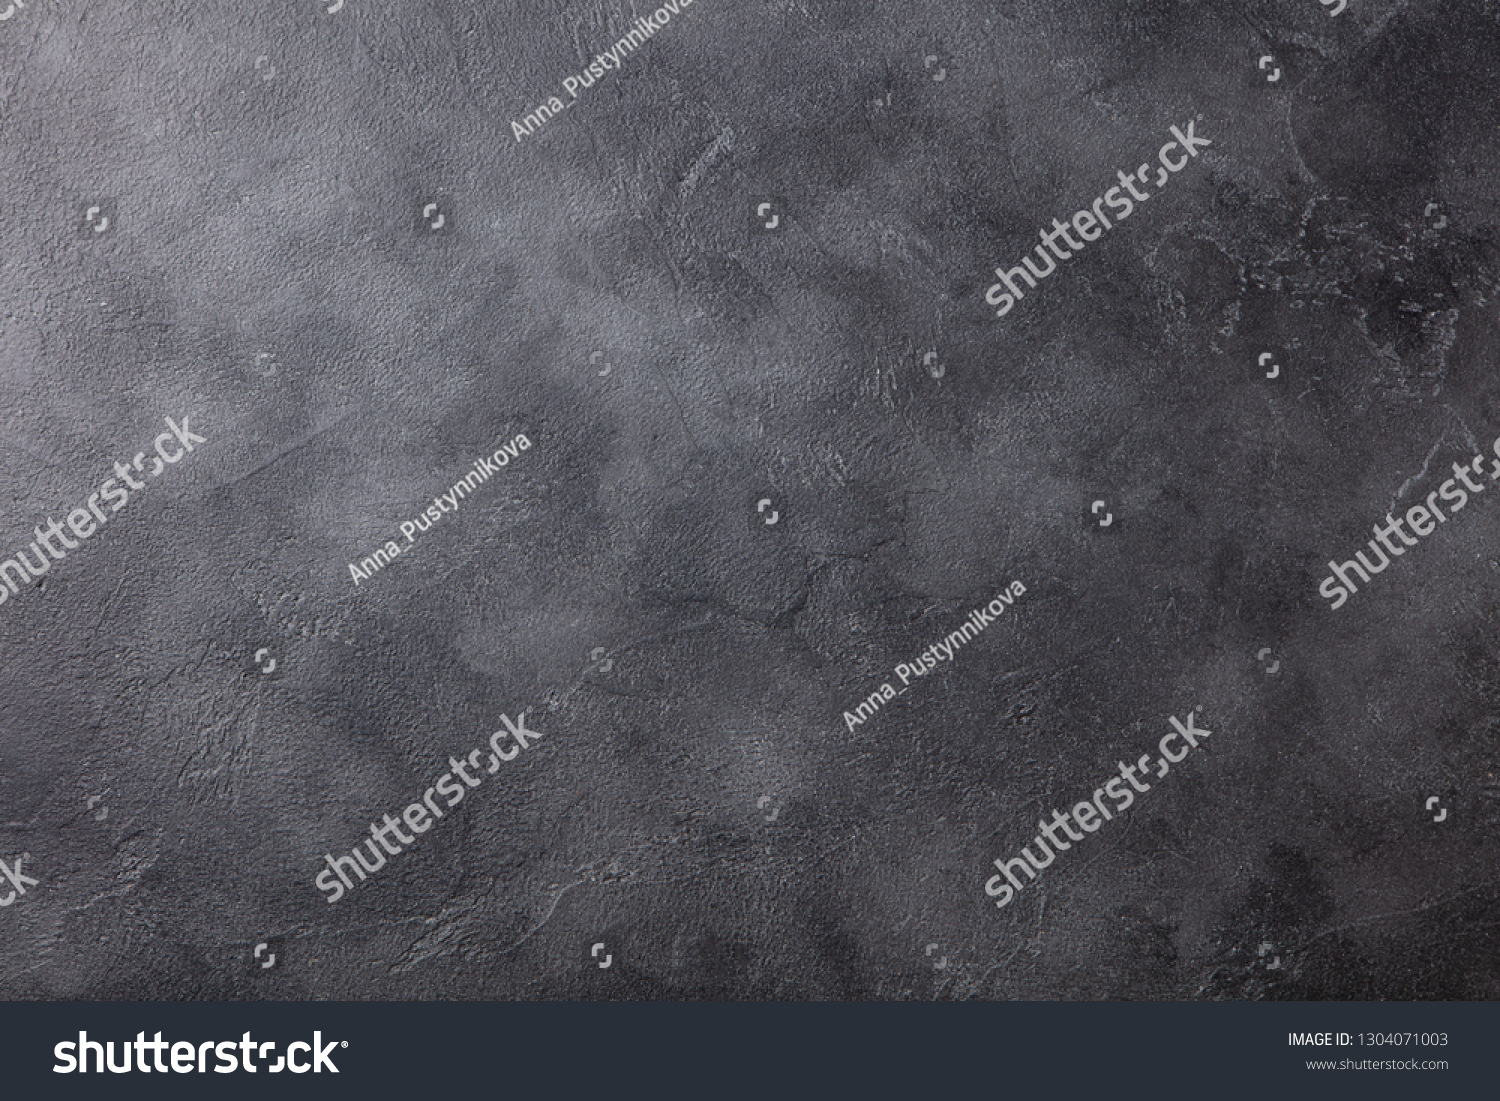 Natural black slate stone background pattern with high resolution. Top view. Copy space. #1304071003